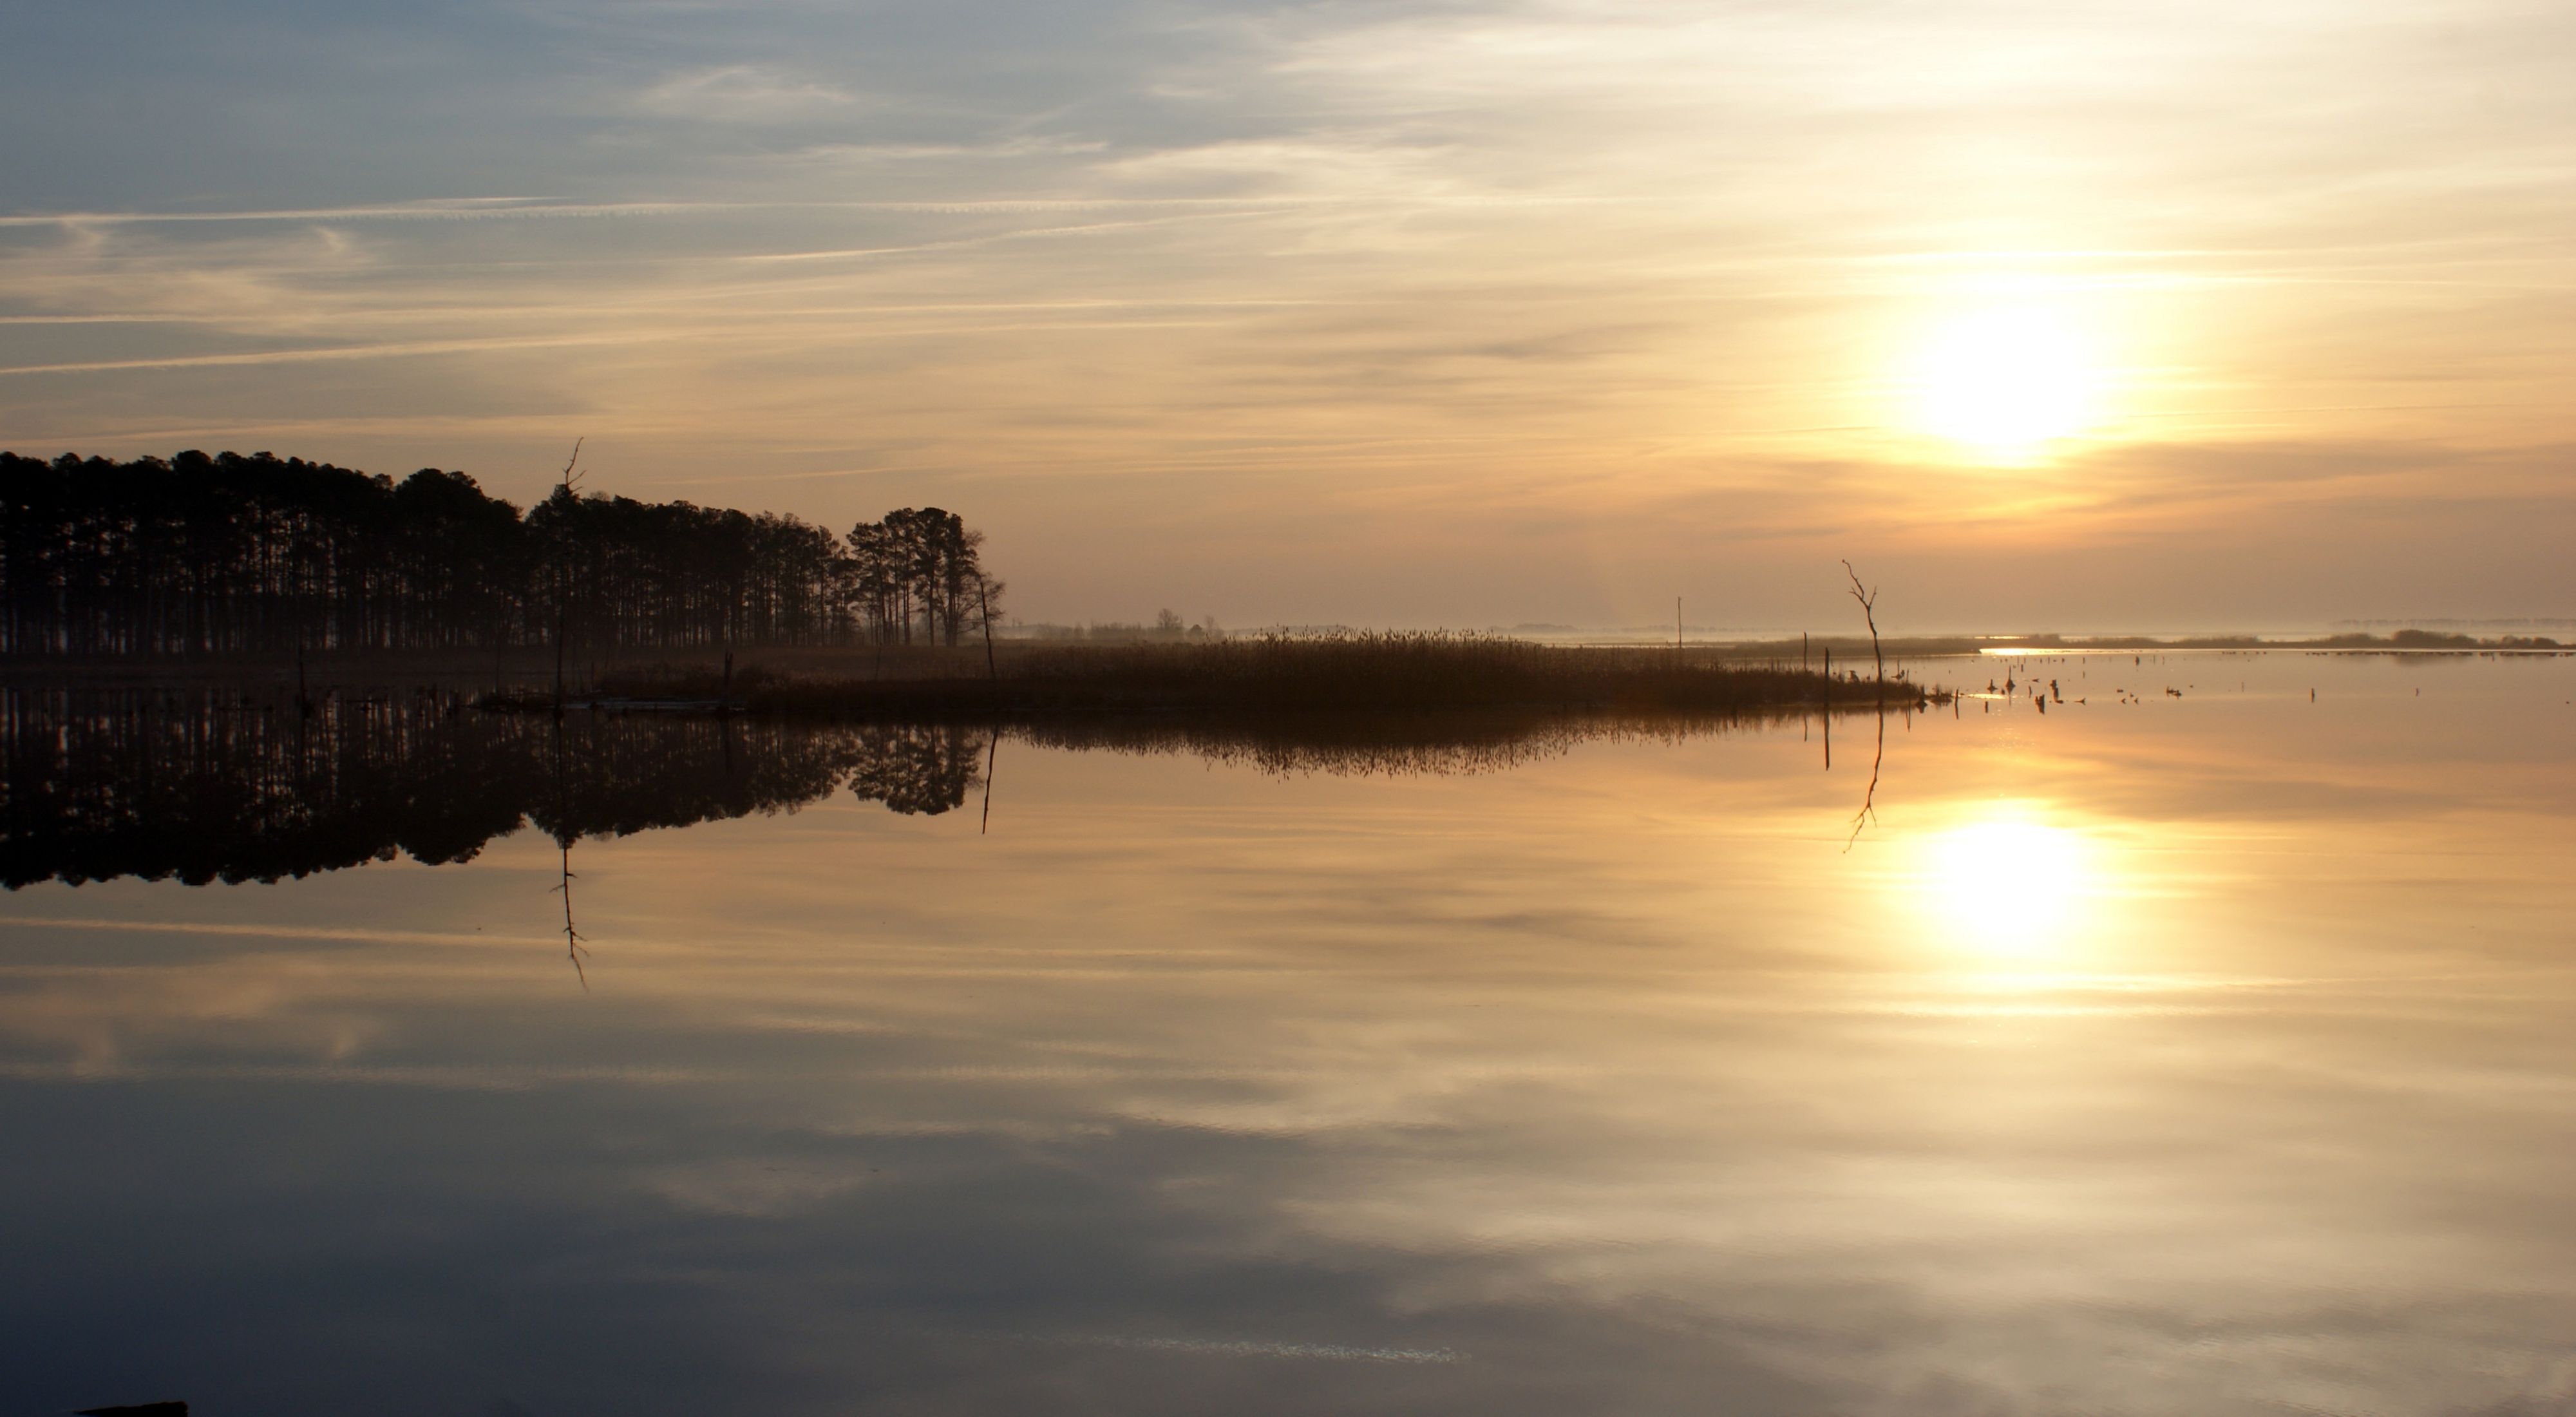 The setting sun and tall pine trees are reflected in the calm water of the Blackwater River. 